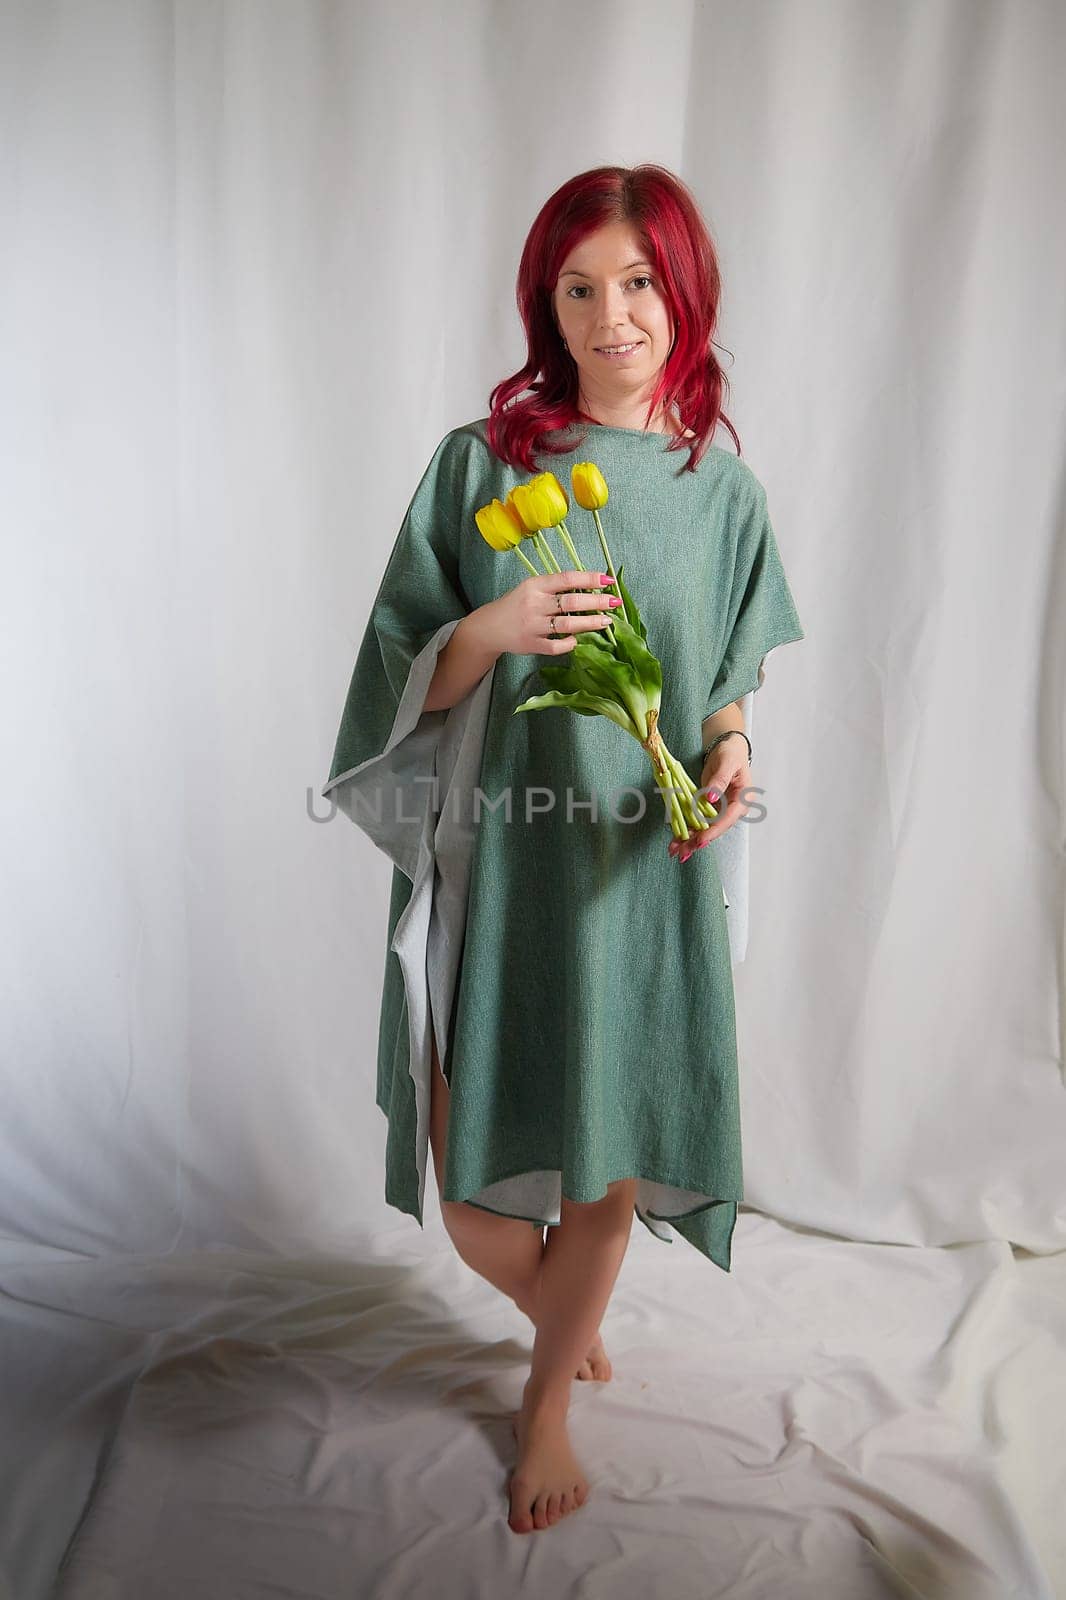 Beautiful woman with red hair in yellow dress on light background holds tulips. Inernational woman's day 8 March